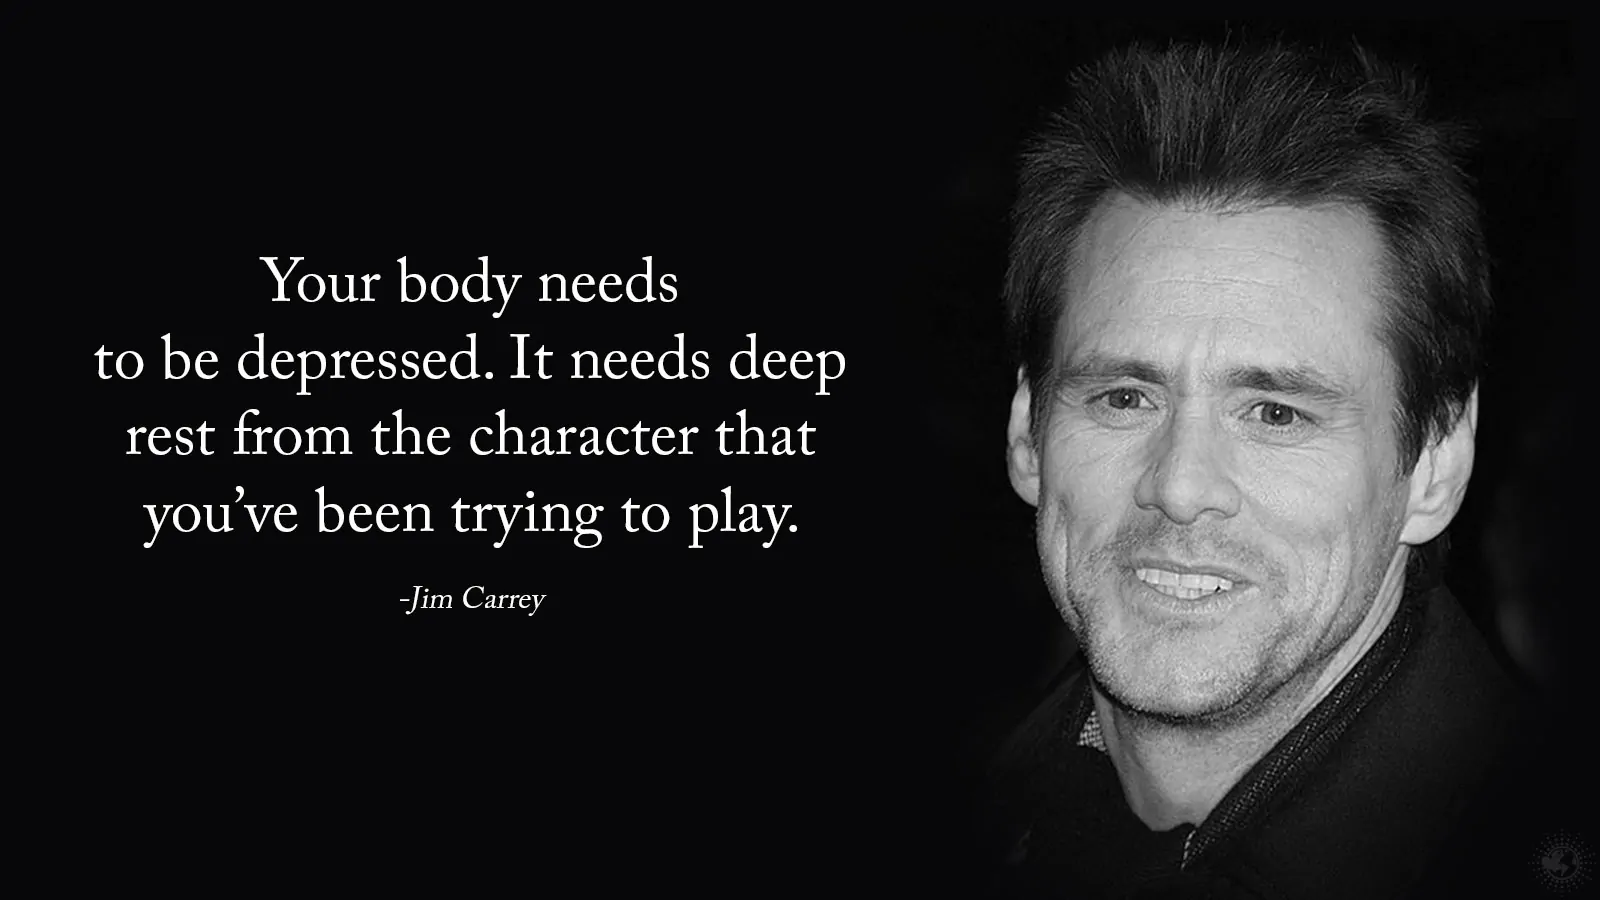 Jim Carrey Quote about Depression